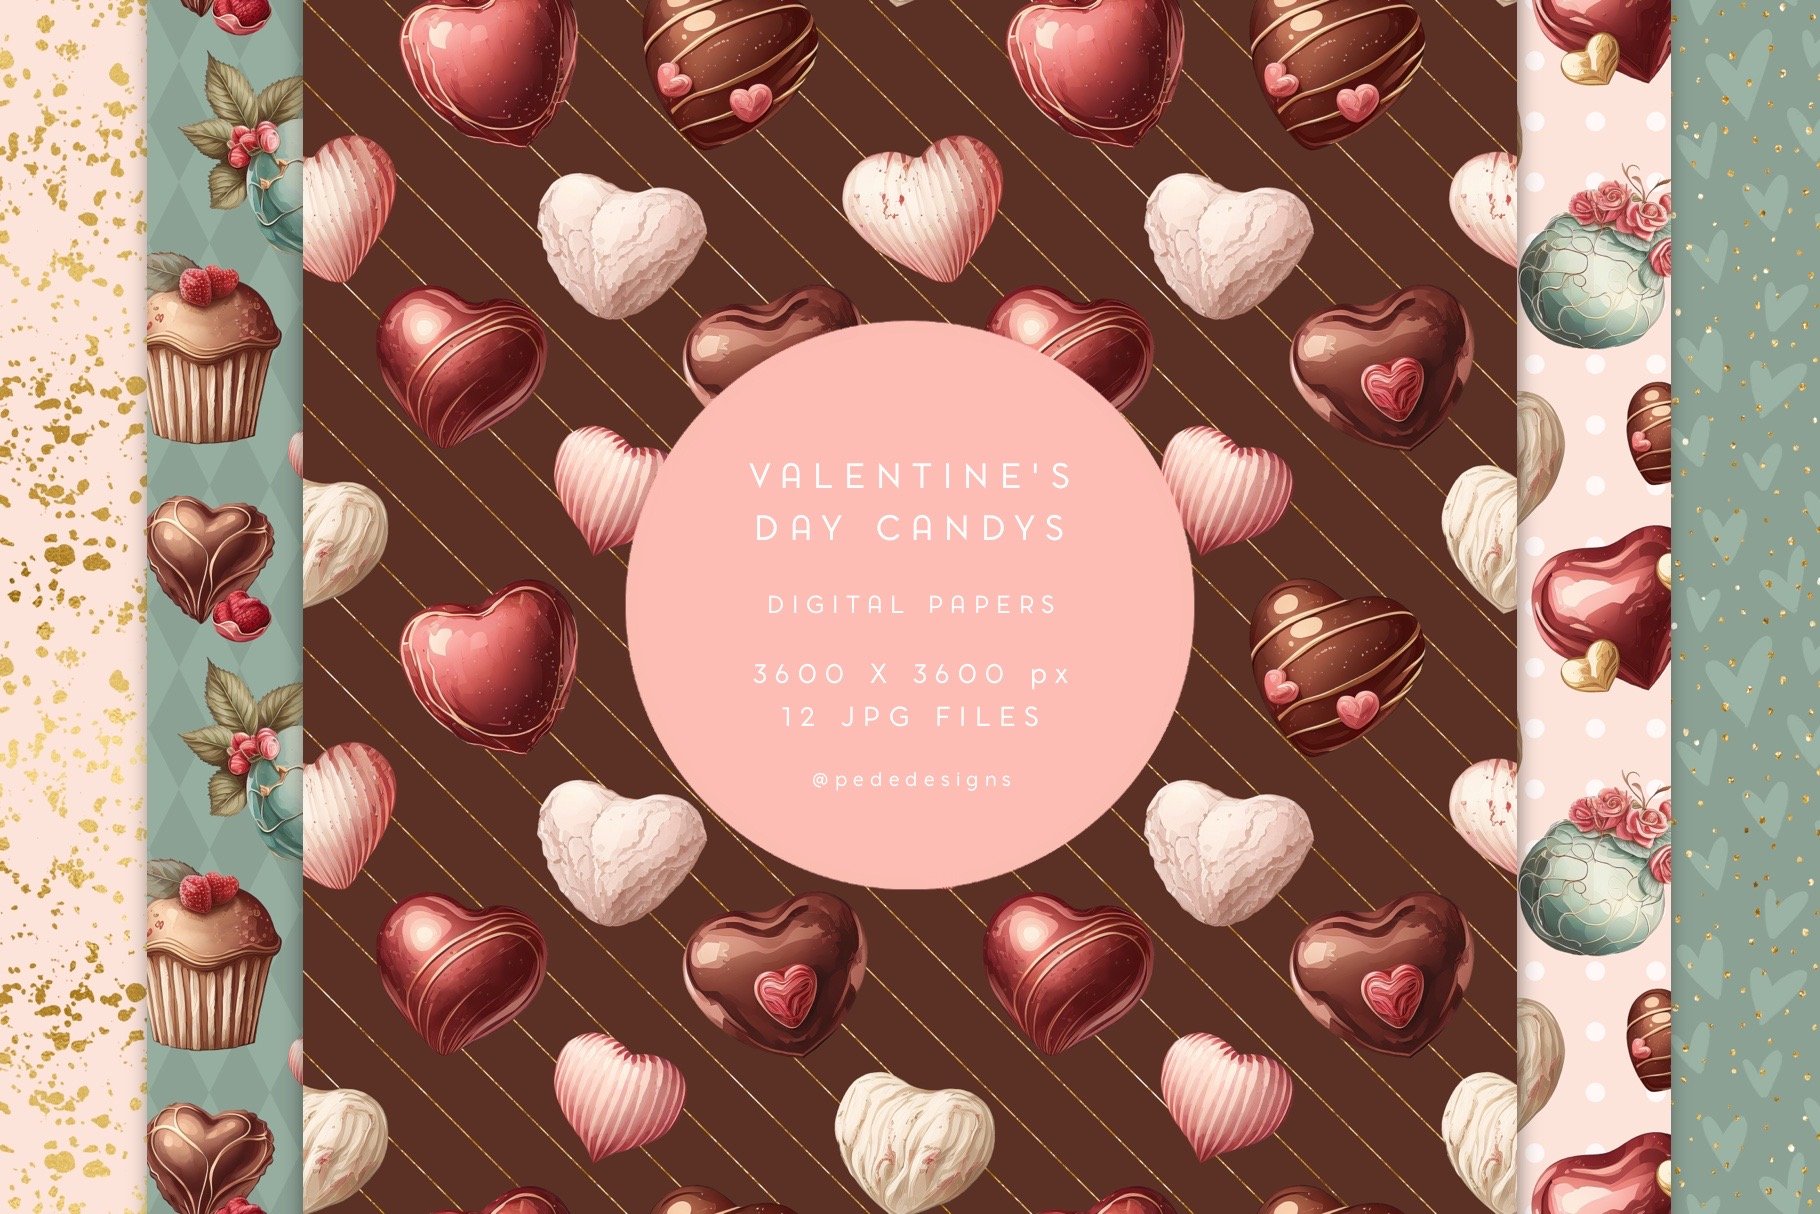 Valentine's Day Candy Digital Paper cover image.